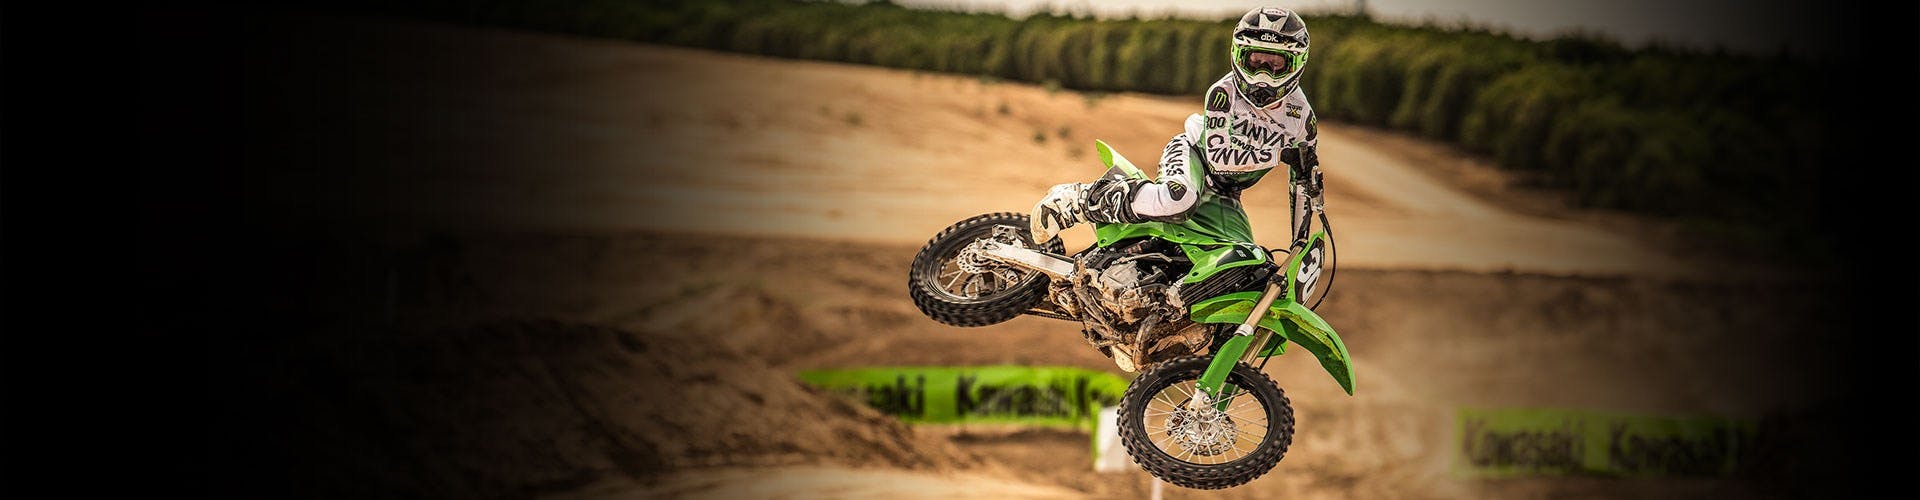 Kawasaki KX85 in action on off-road track